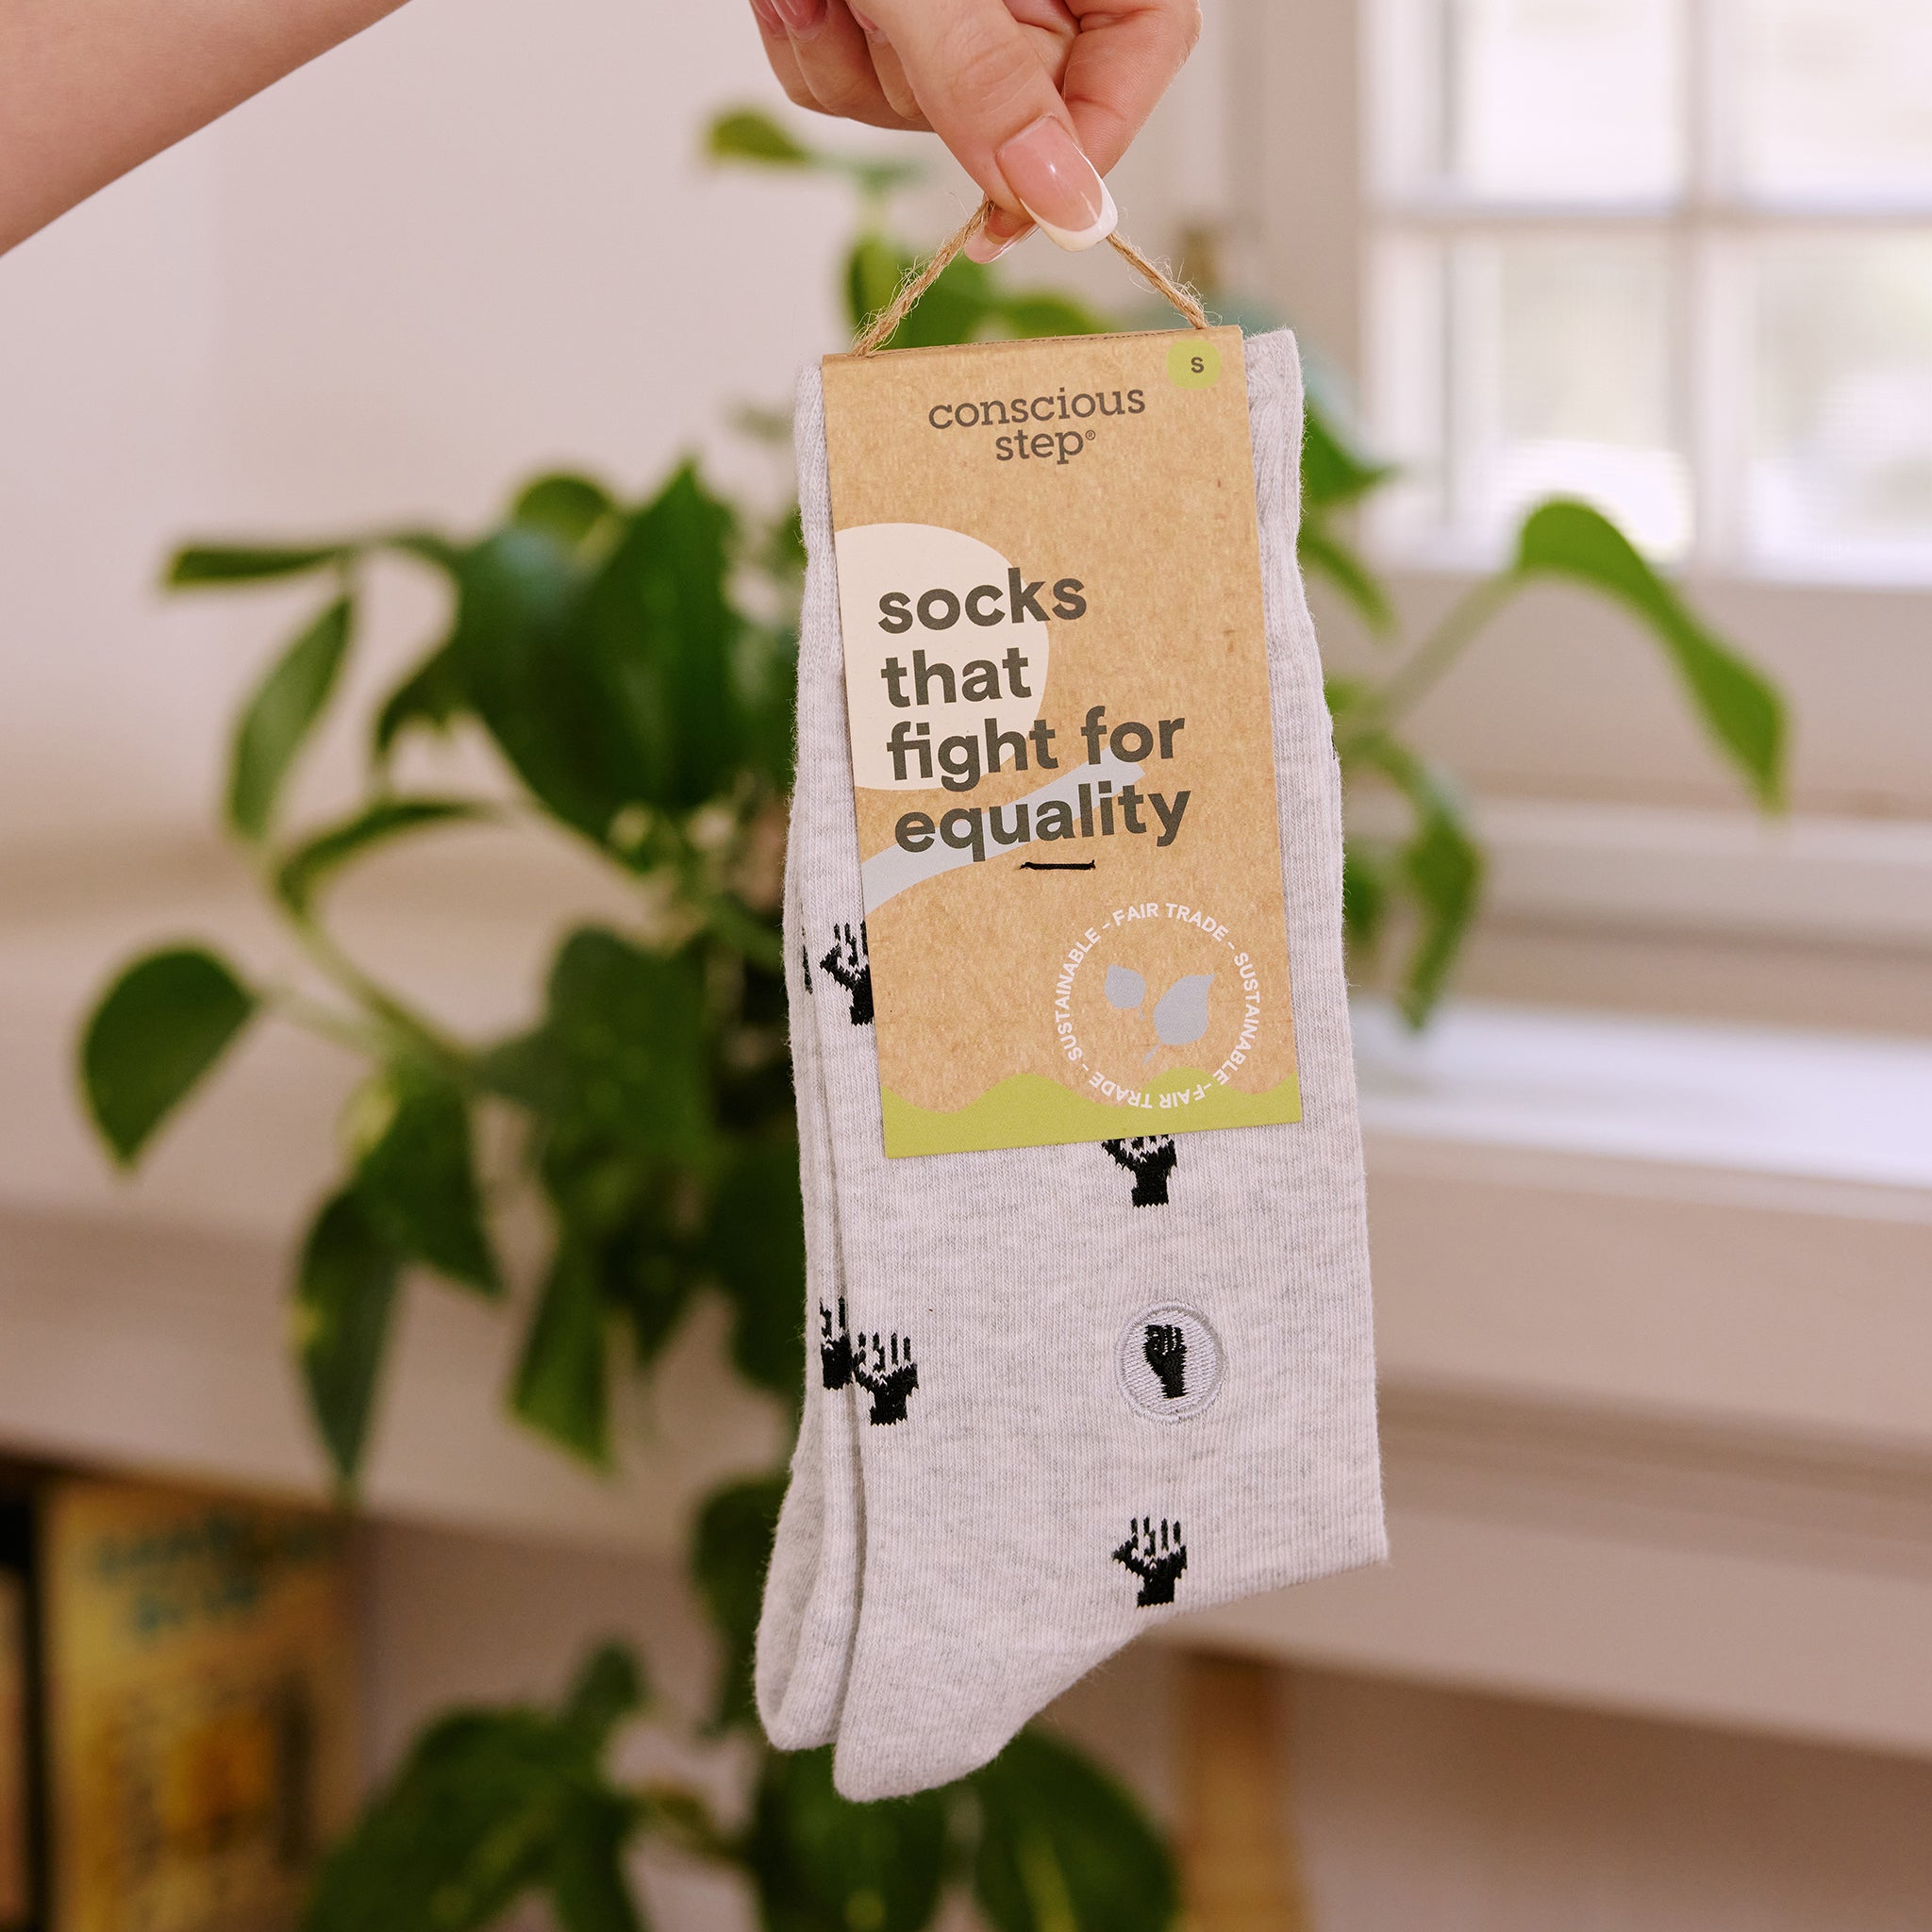 Socks that Fight for Equality